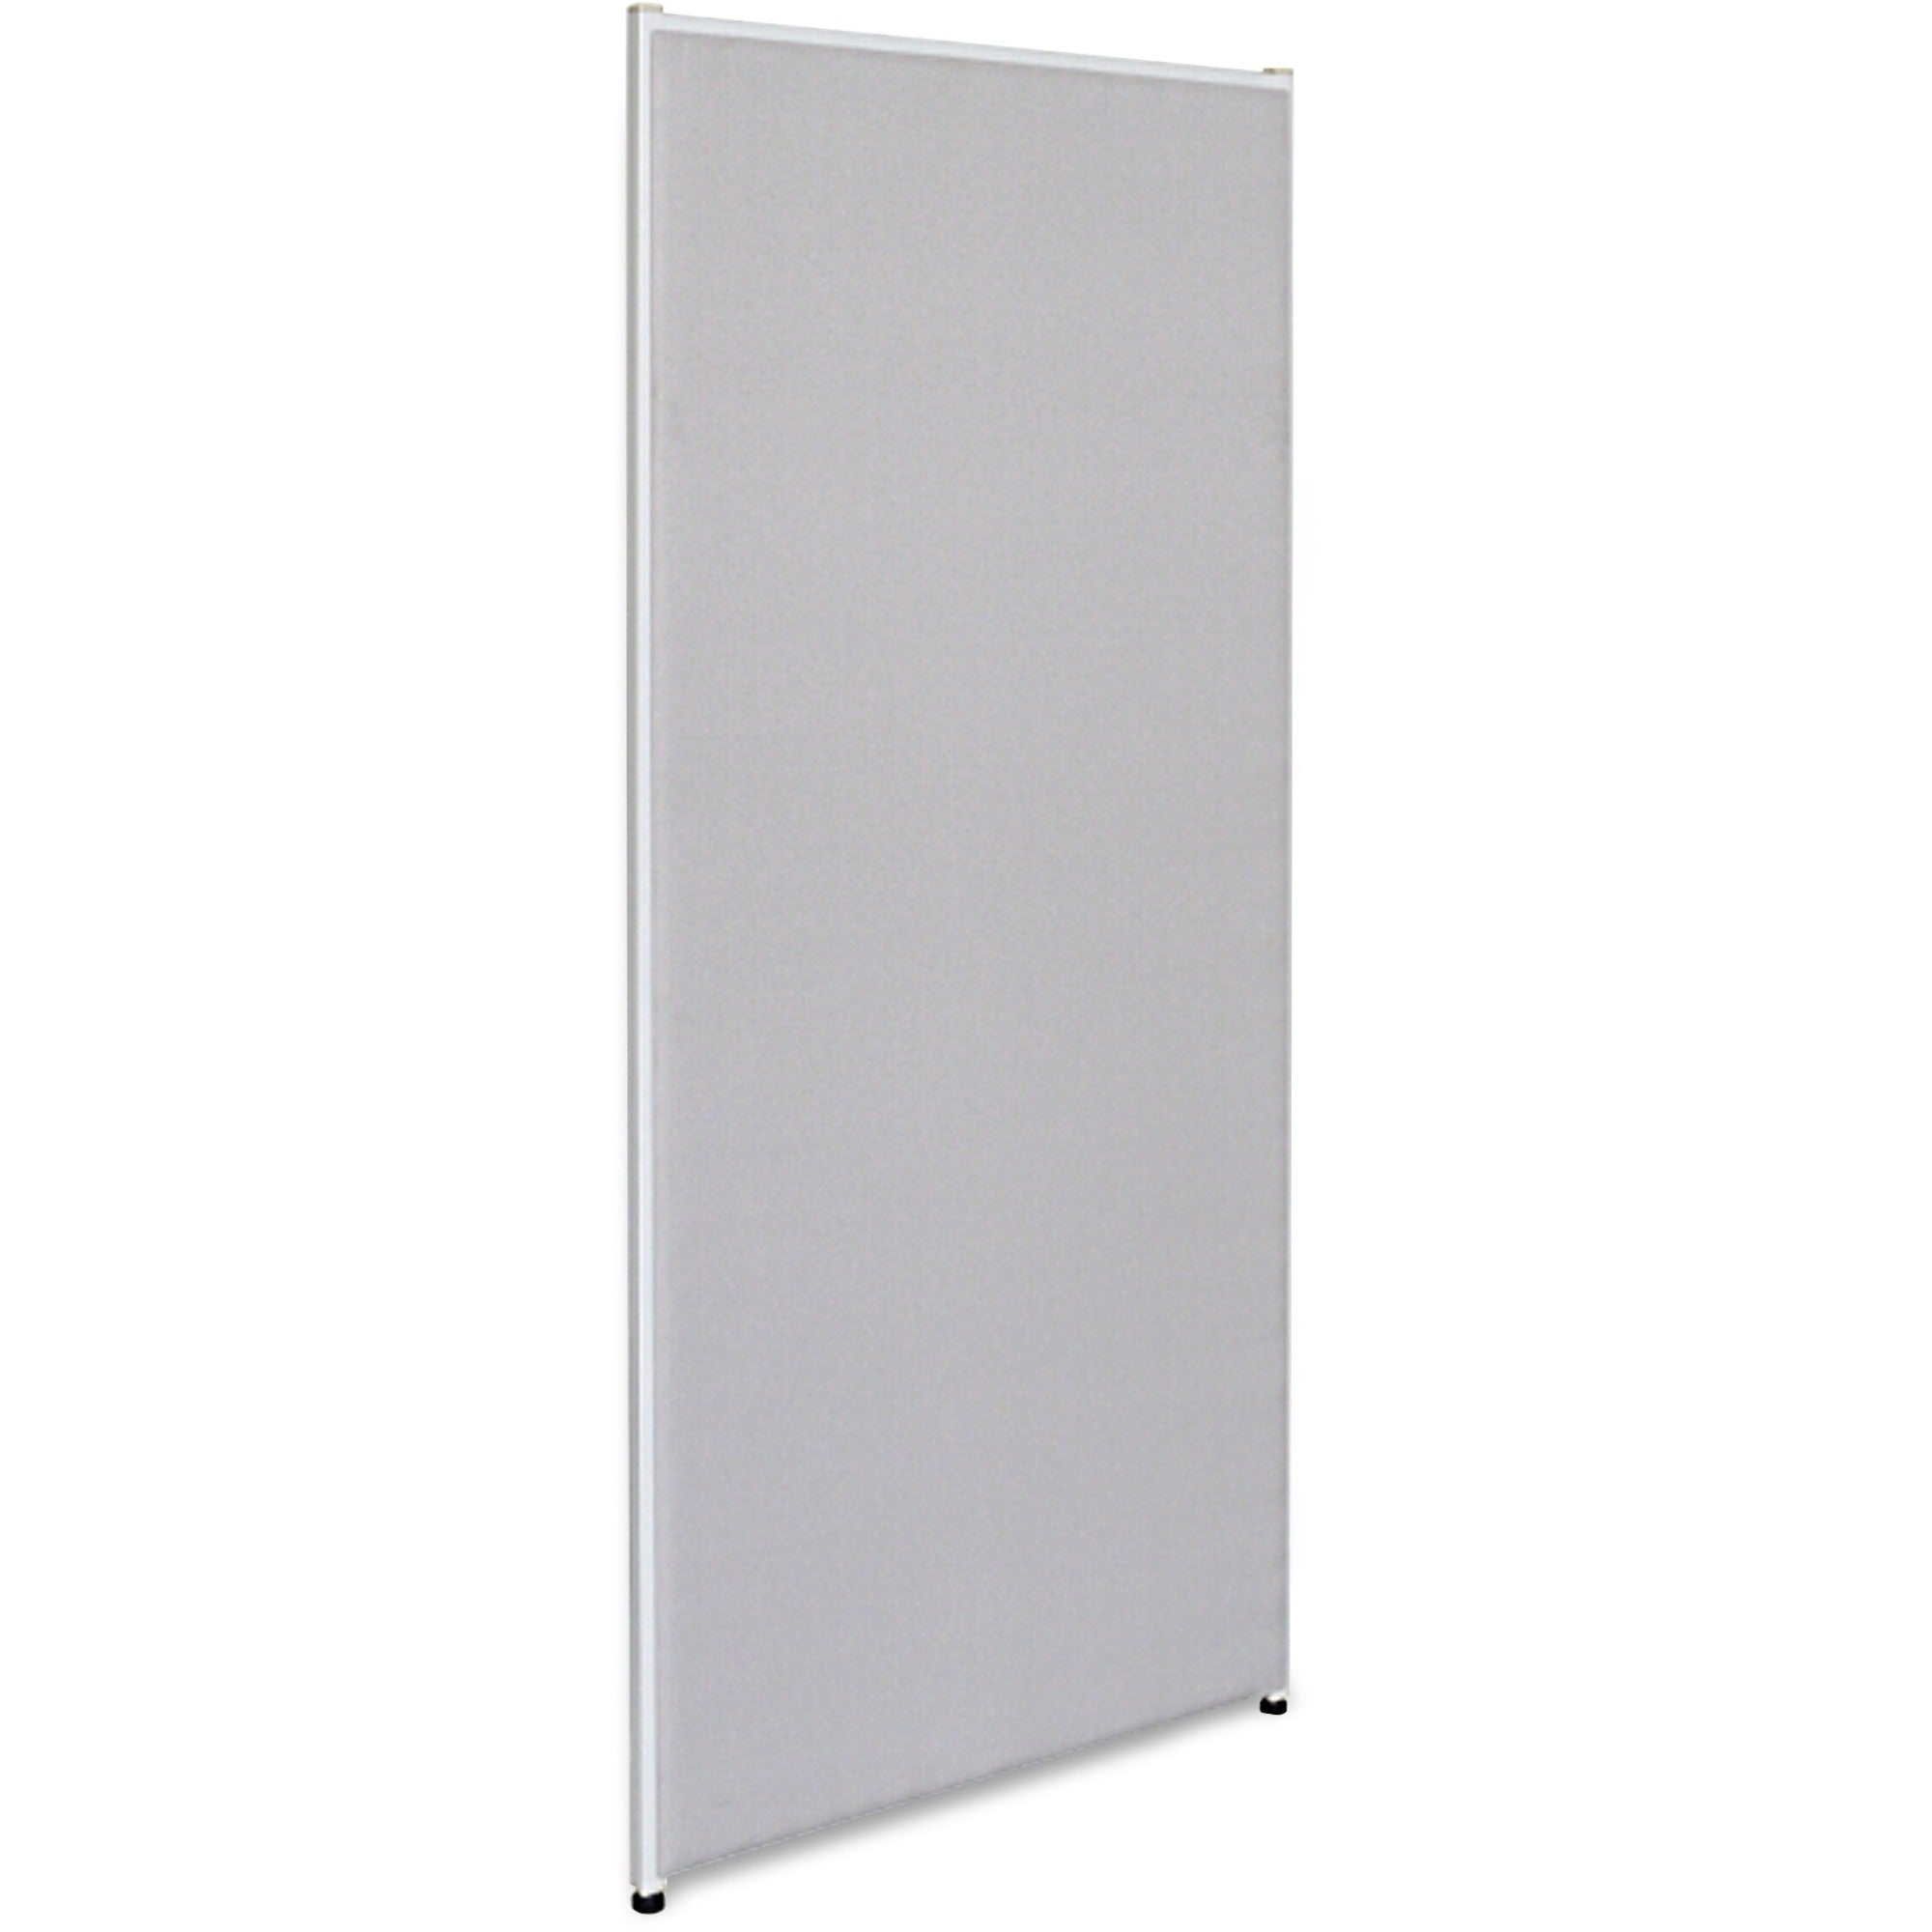 Lorell Panel System Partition Fabric Panel - 30.5" Width x 71" Height - Steel Frame - Gray - 1 Each - 